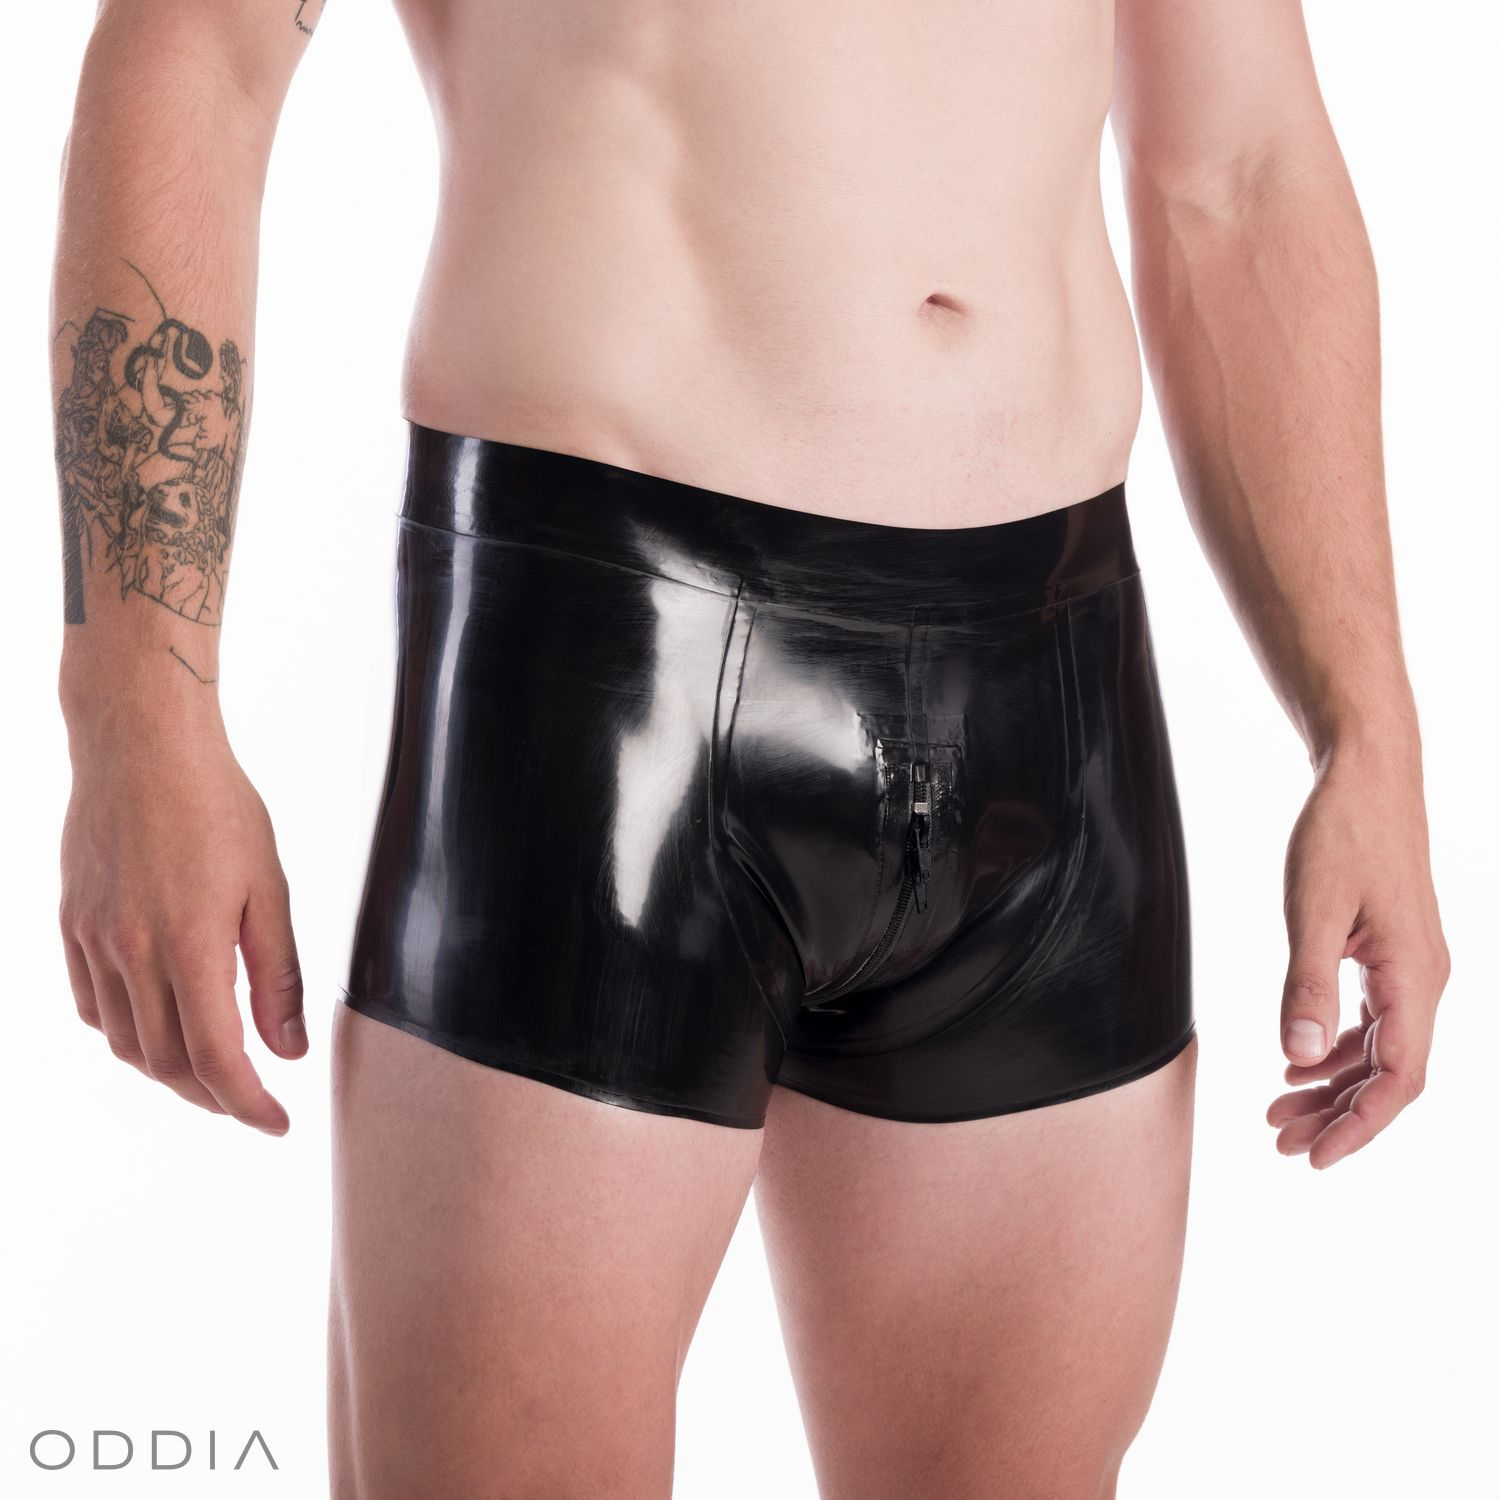 Men's latex trunks with dual zipper in the crotch